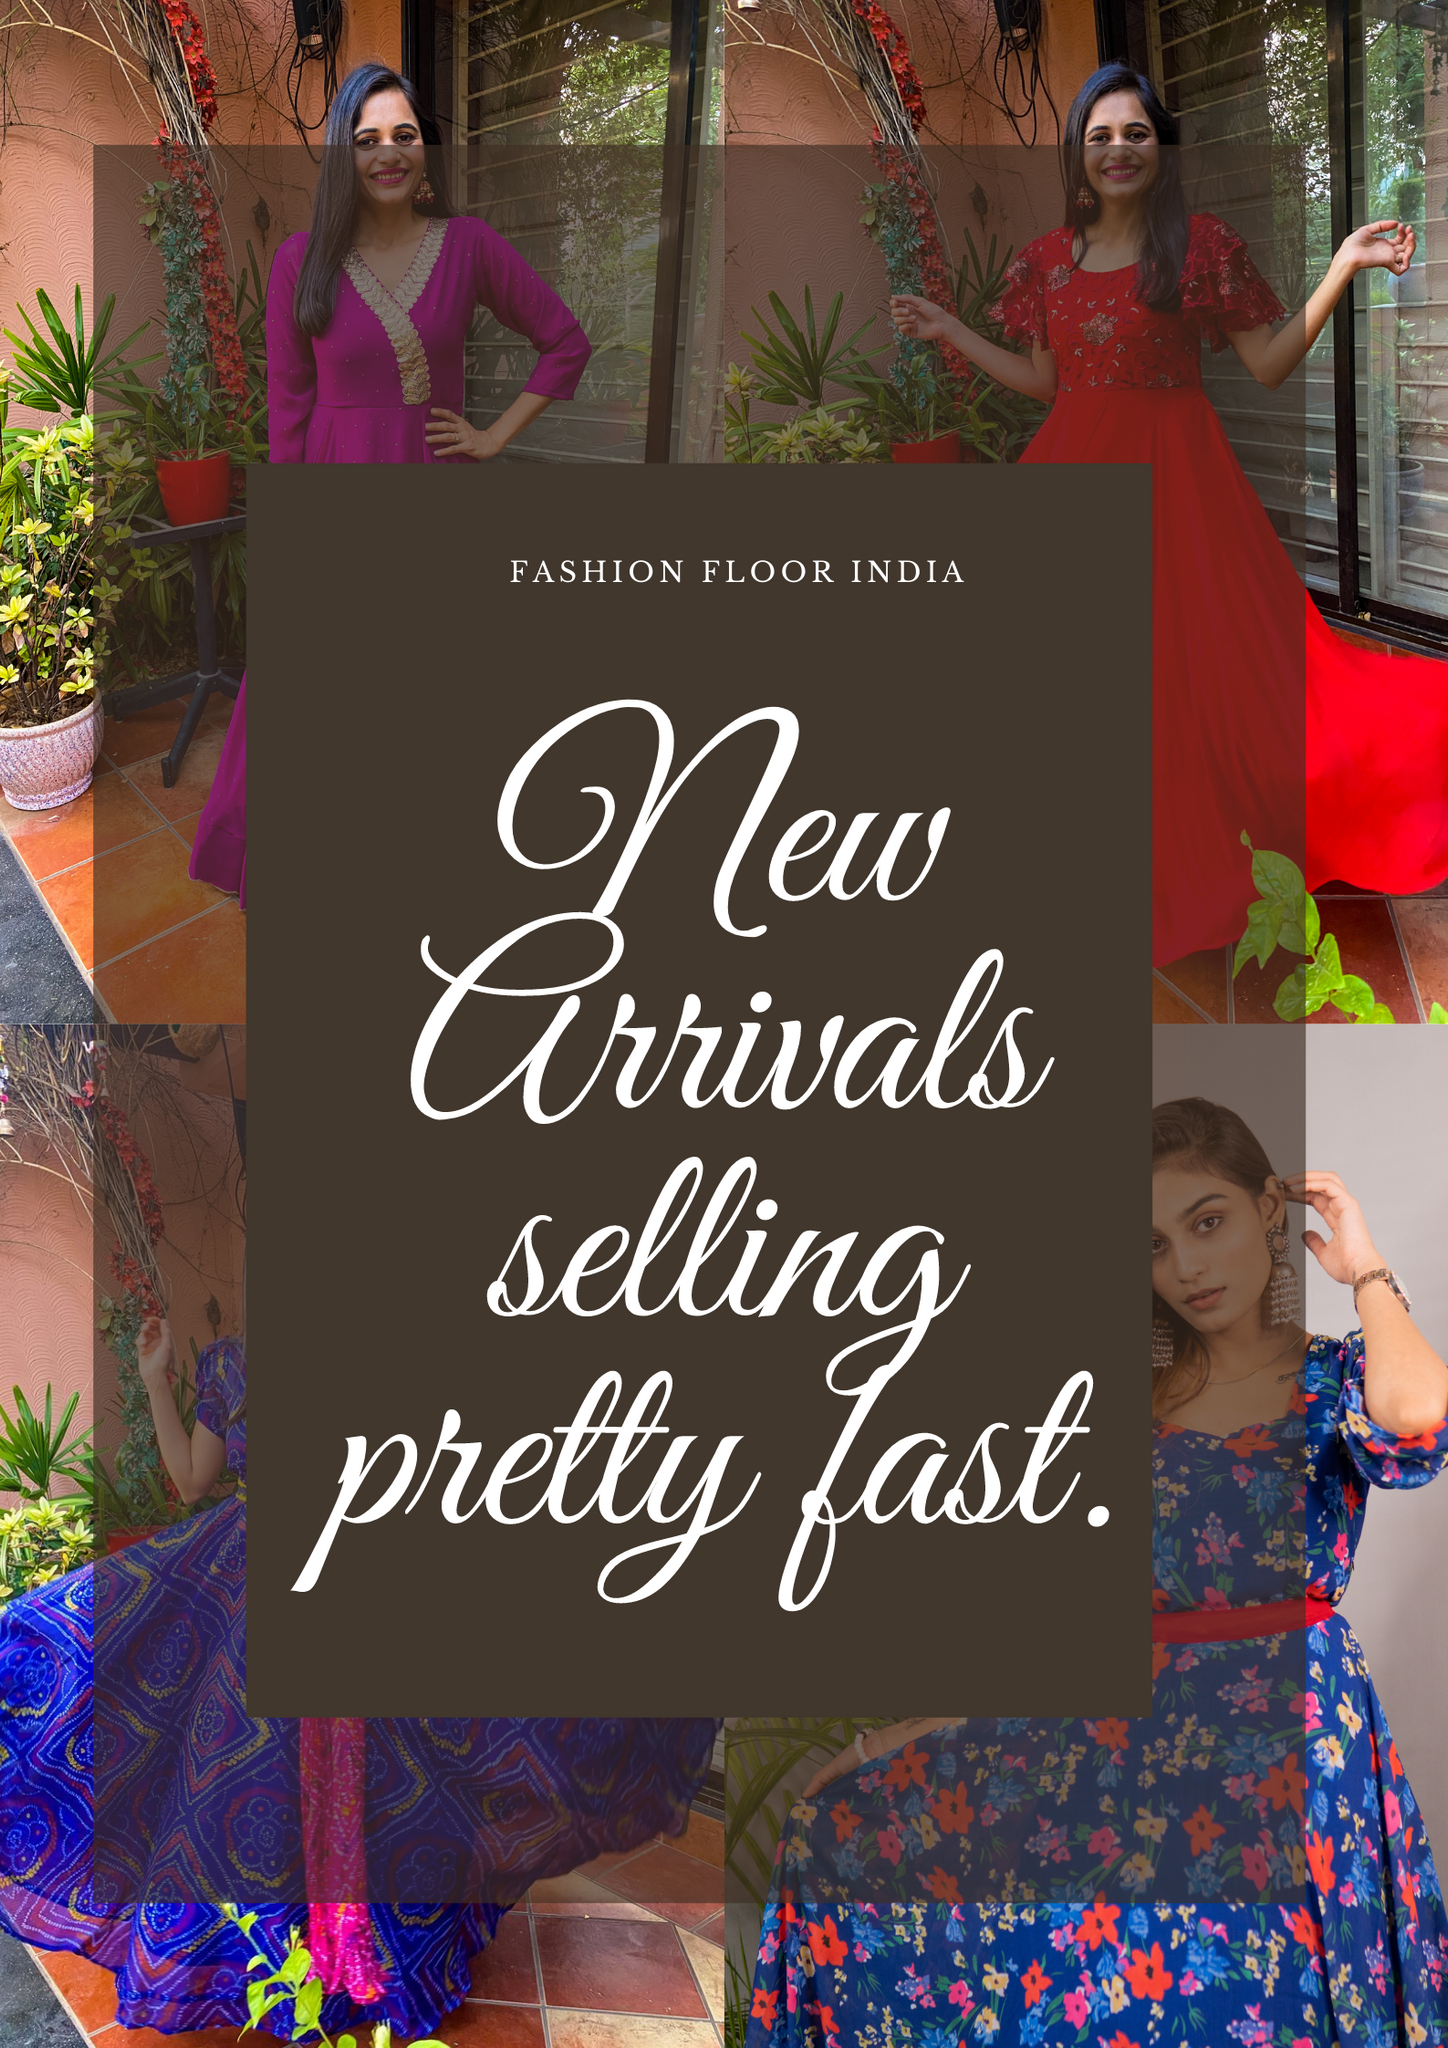 New Arrivals are selling pretty fast.